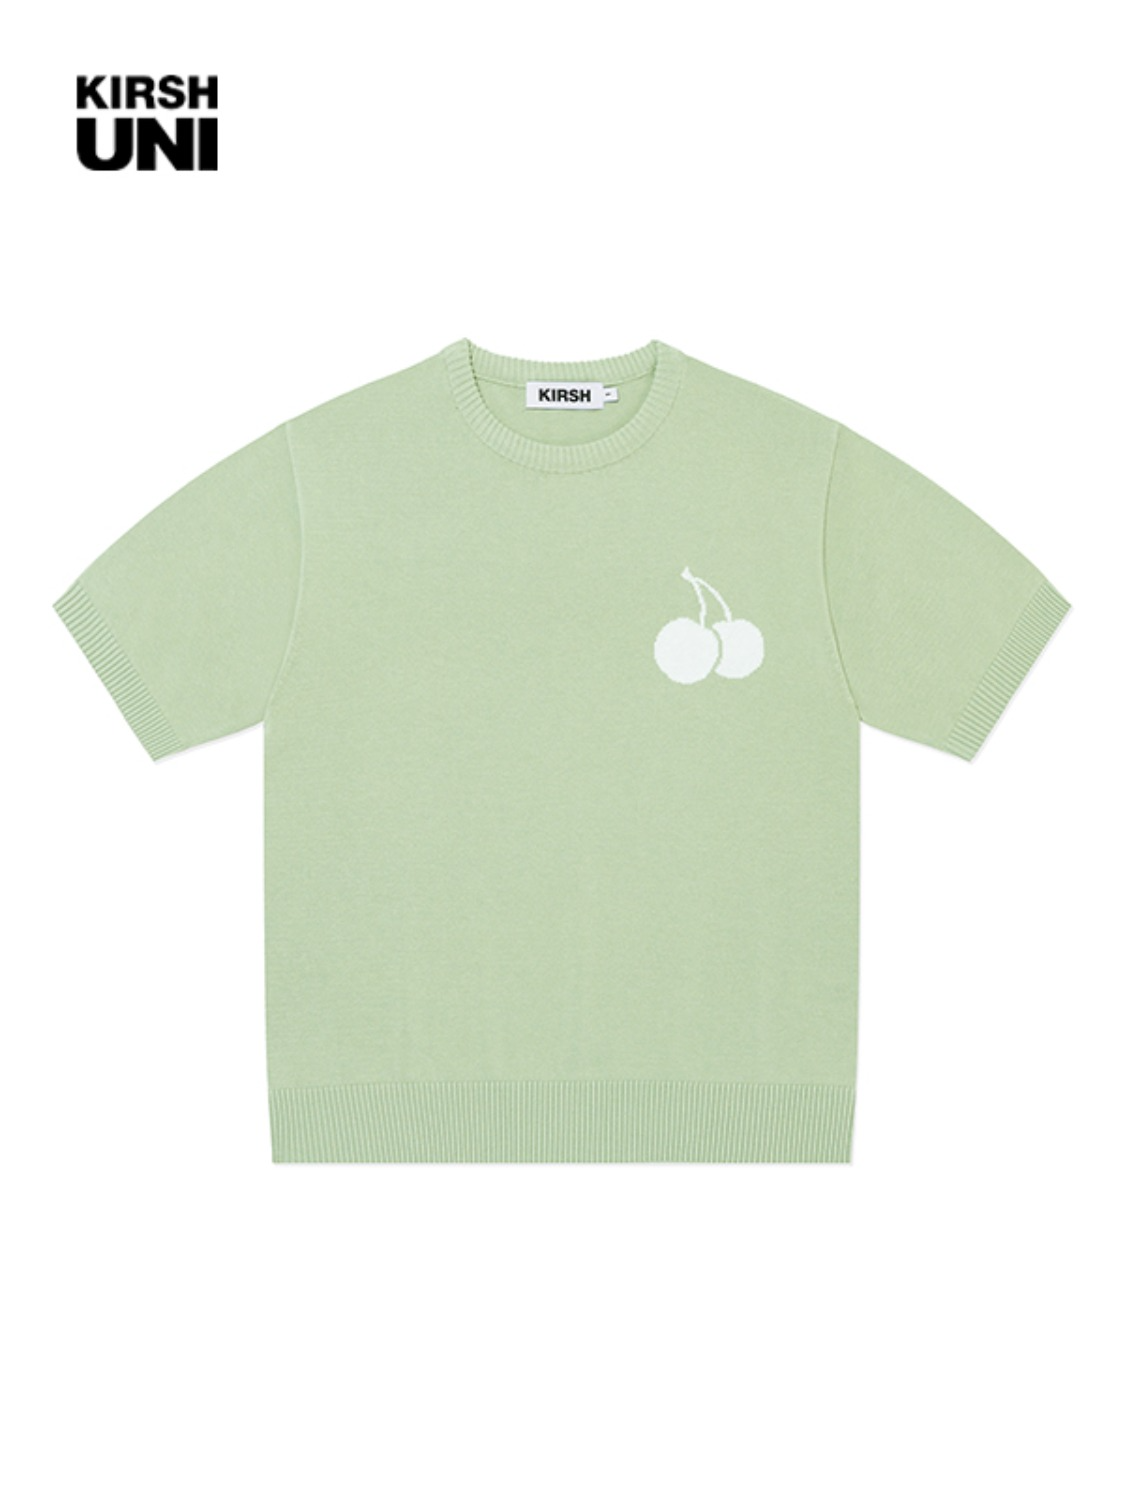 UNI MIDDLE CHERRY HALF SLEEVE KNIT SWEATER KH [GREEN]